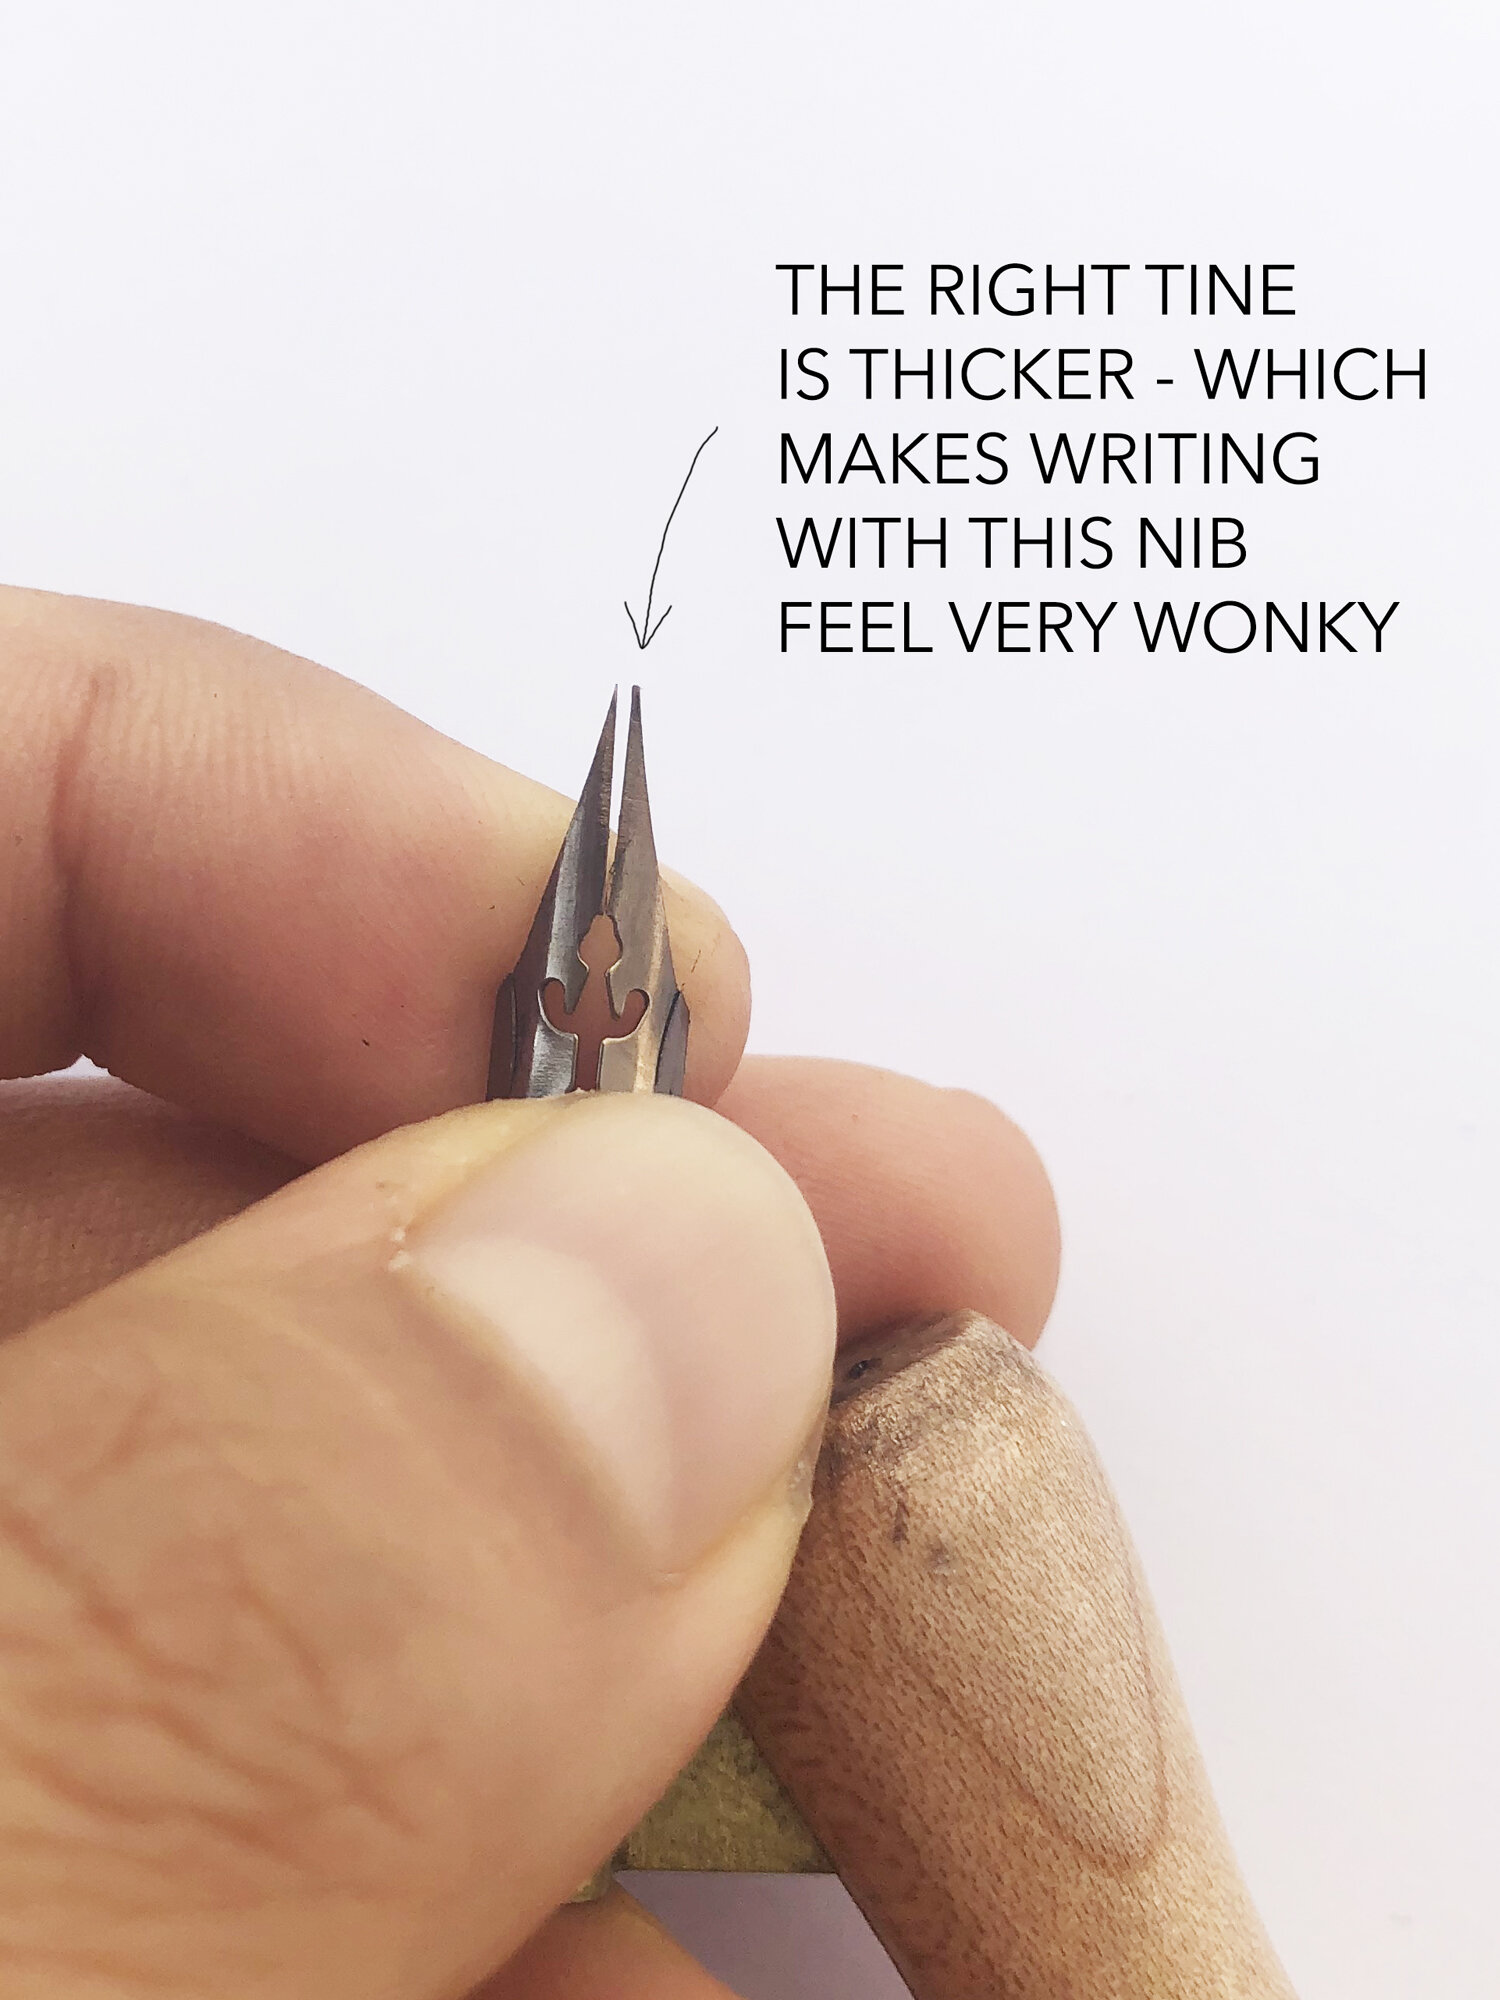 HOW TO: Choose the Right Calligraphy Nib — Crooked Calligraphy